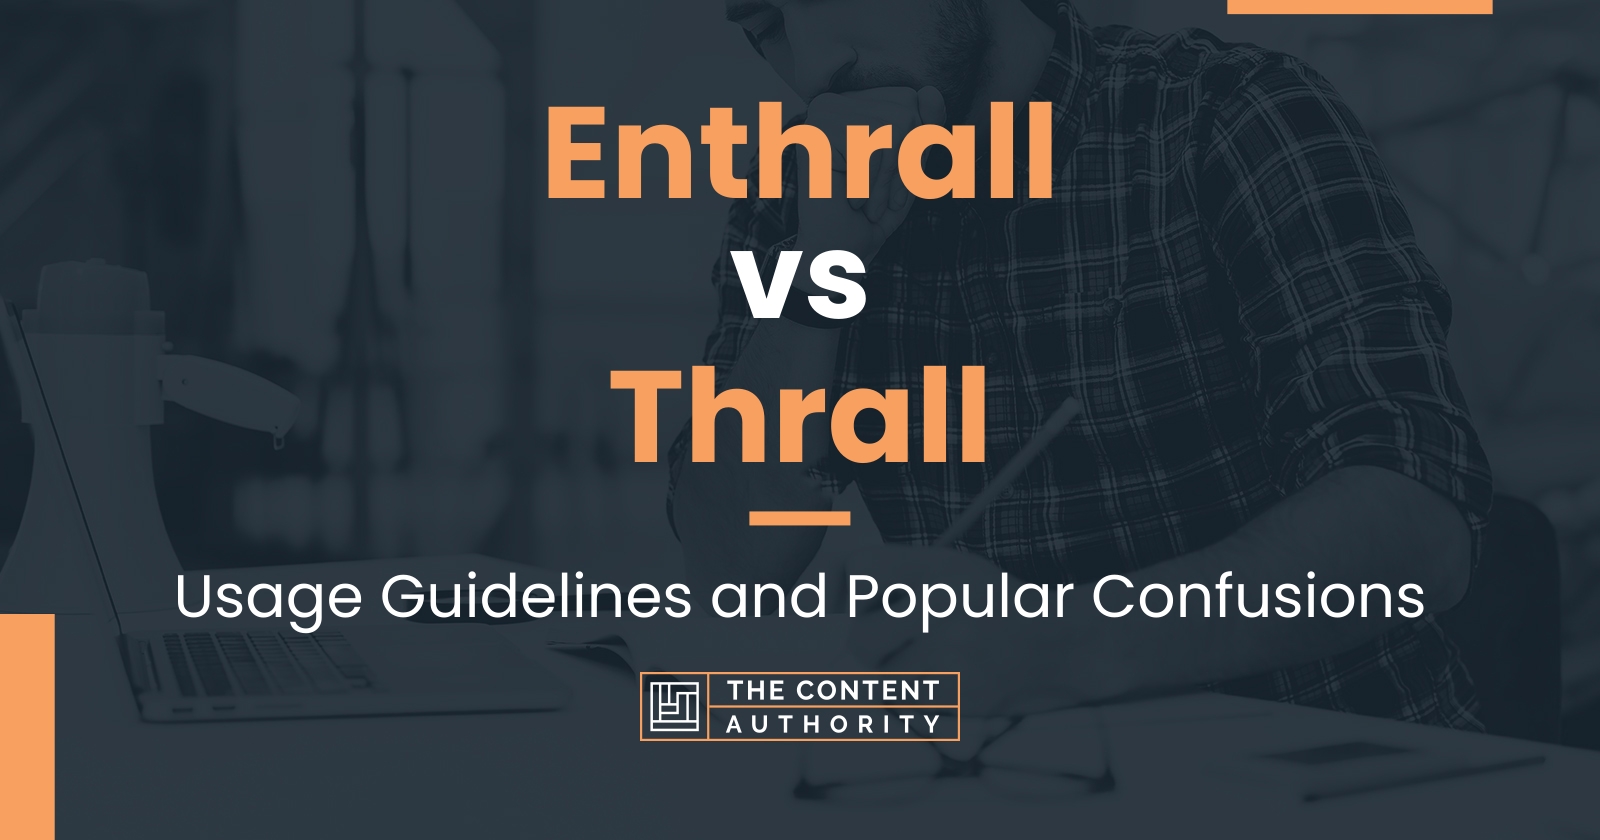 Enthrall vs Thrall: Usage Guidelines and Popular Confusions